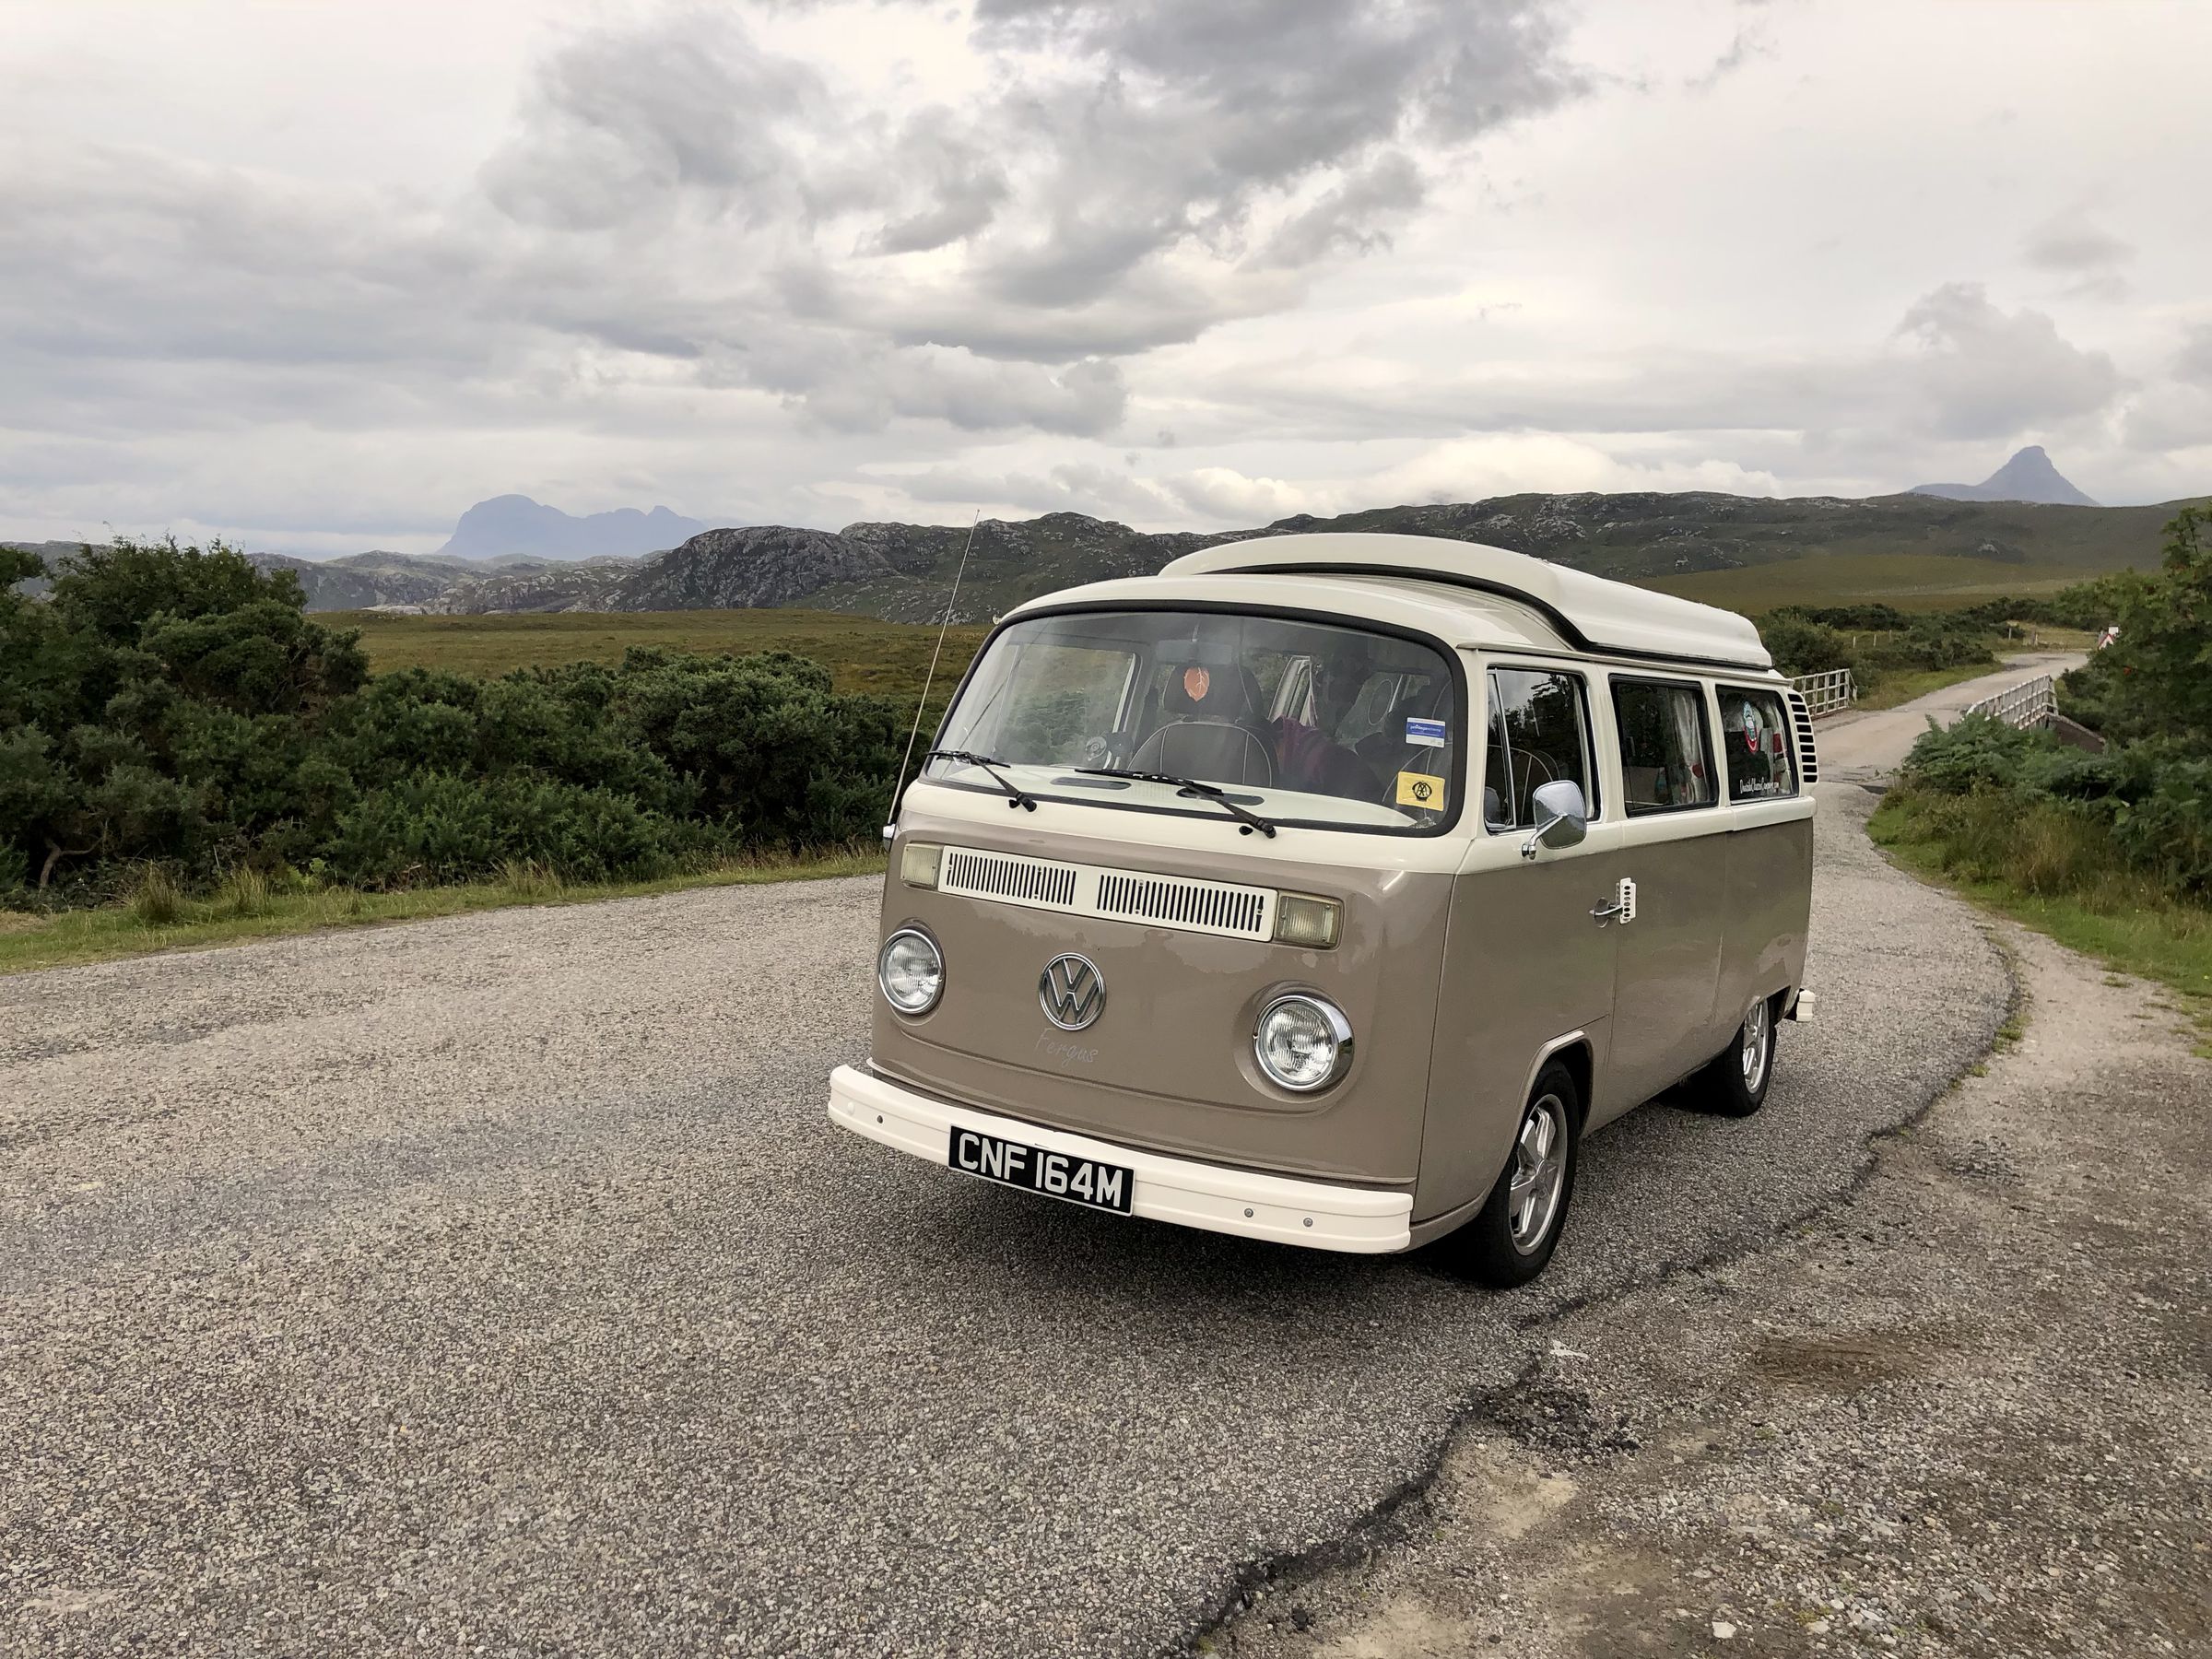 Say hi to Fergus, our trusty Type 2 Microbus in Scotland.